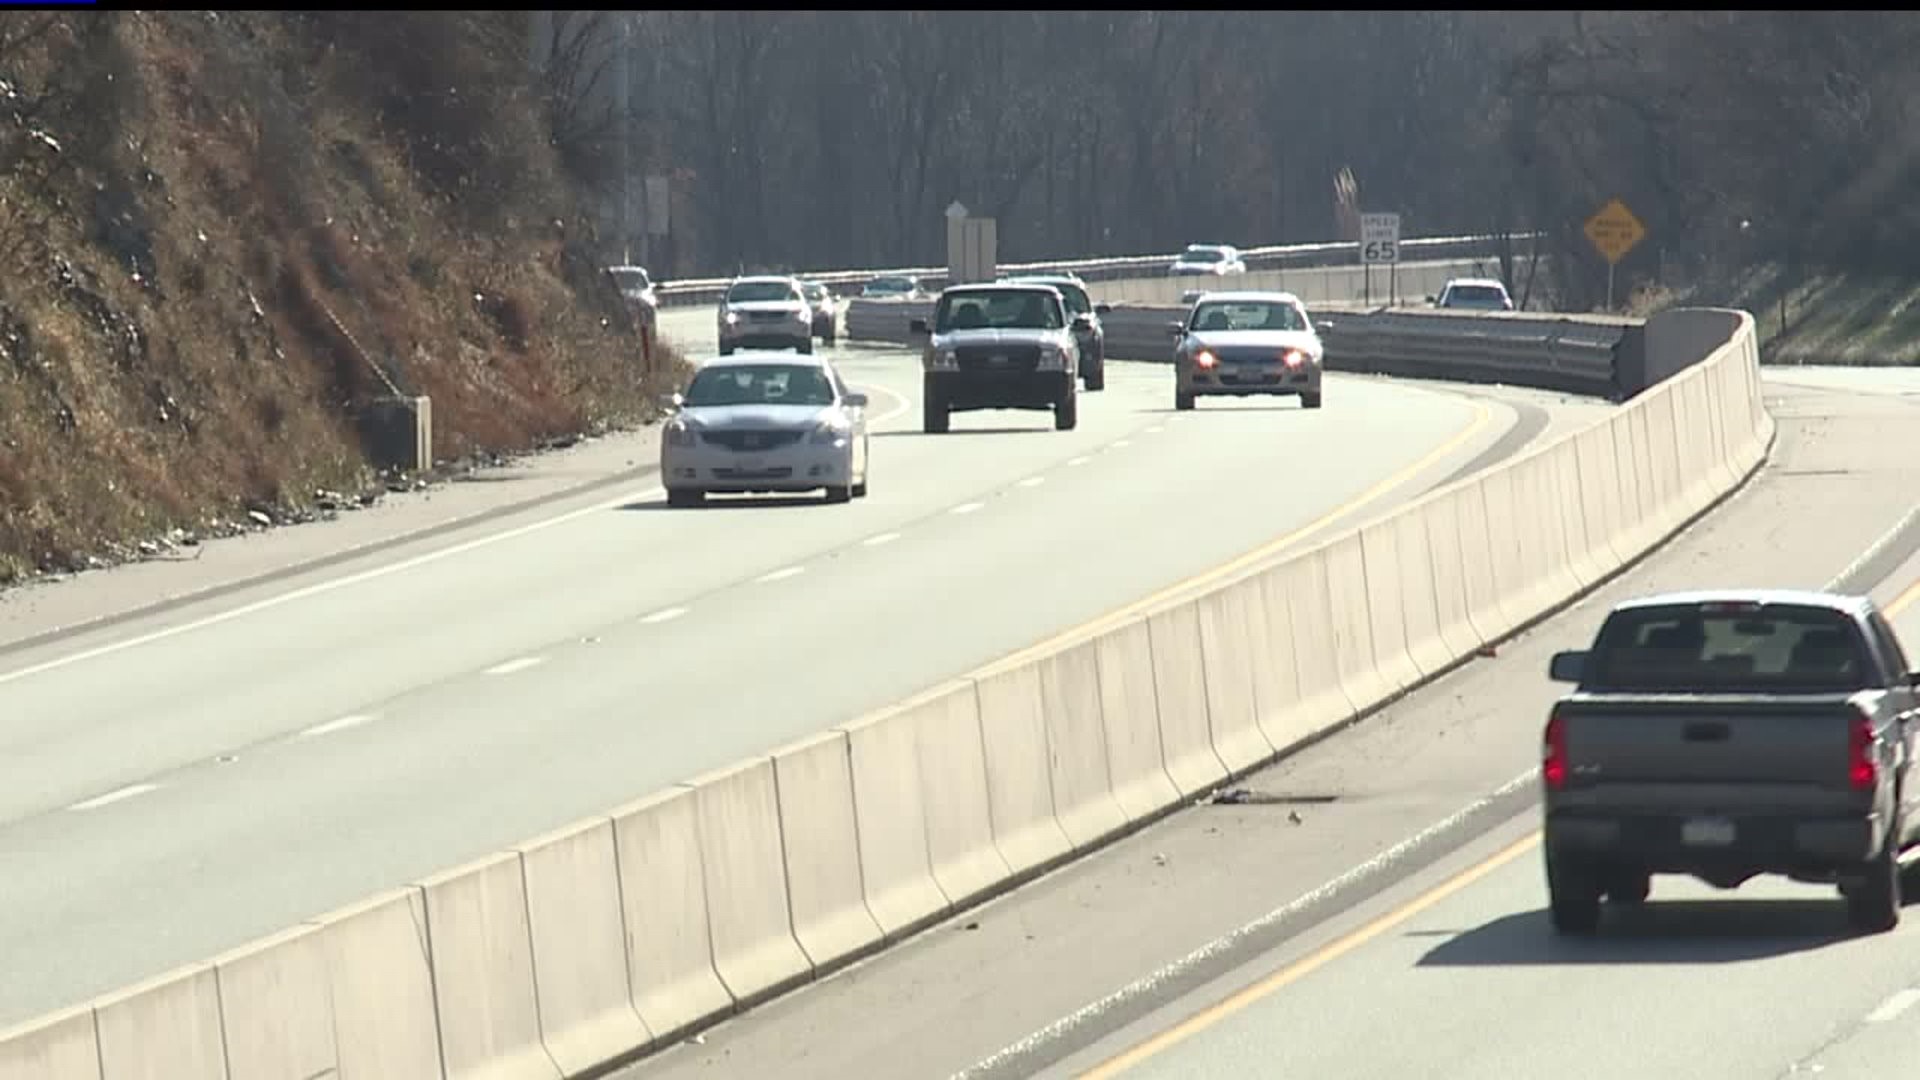 Christmas Day brings travelers to the road